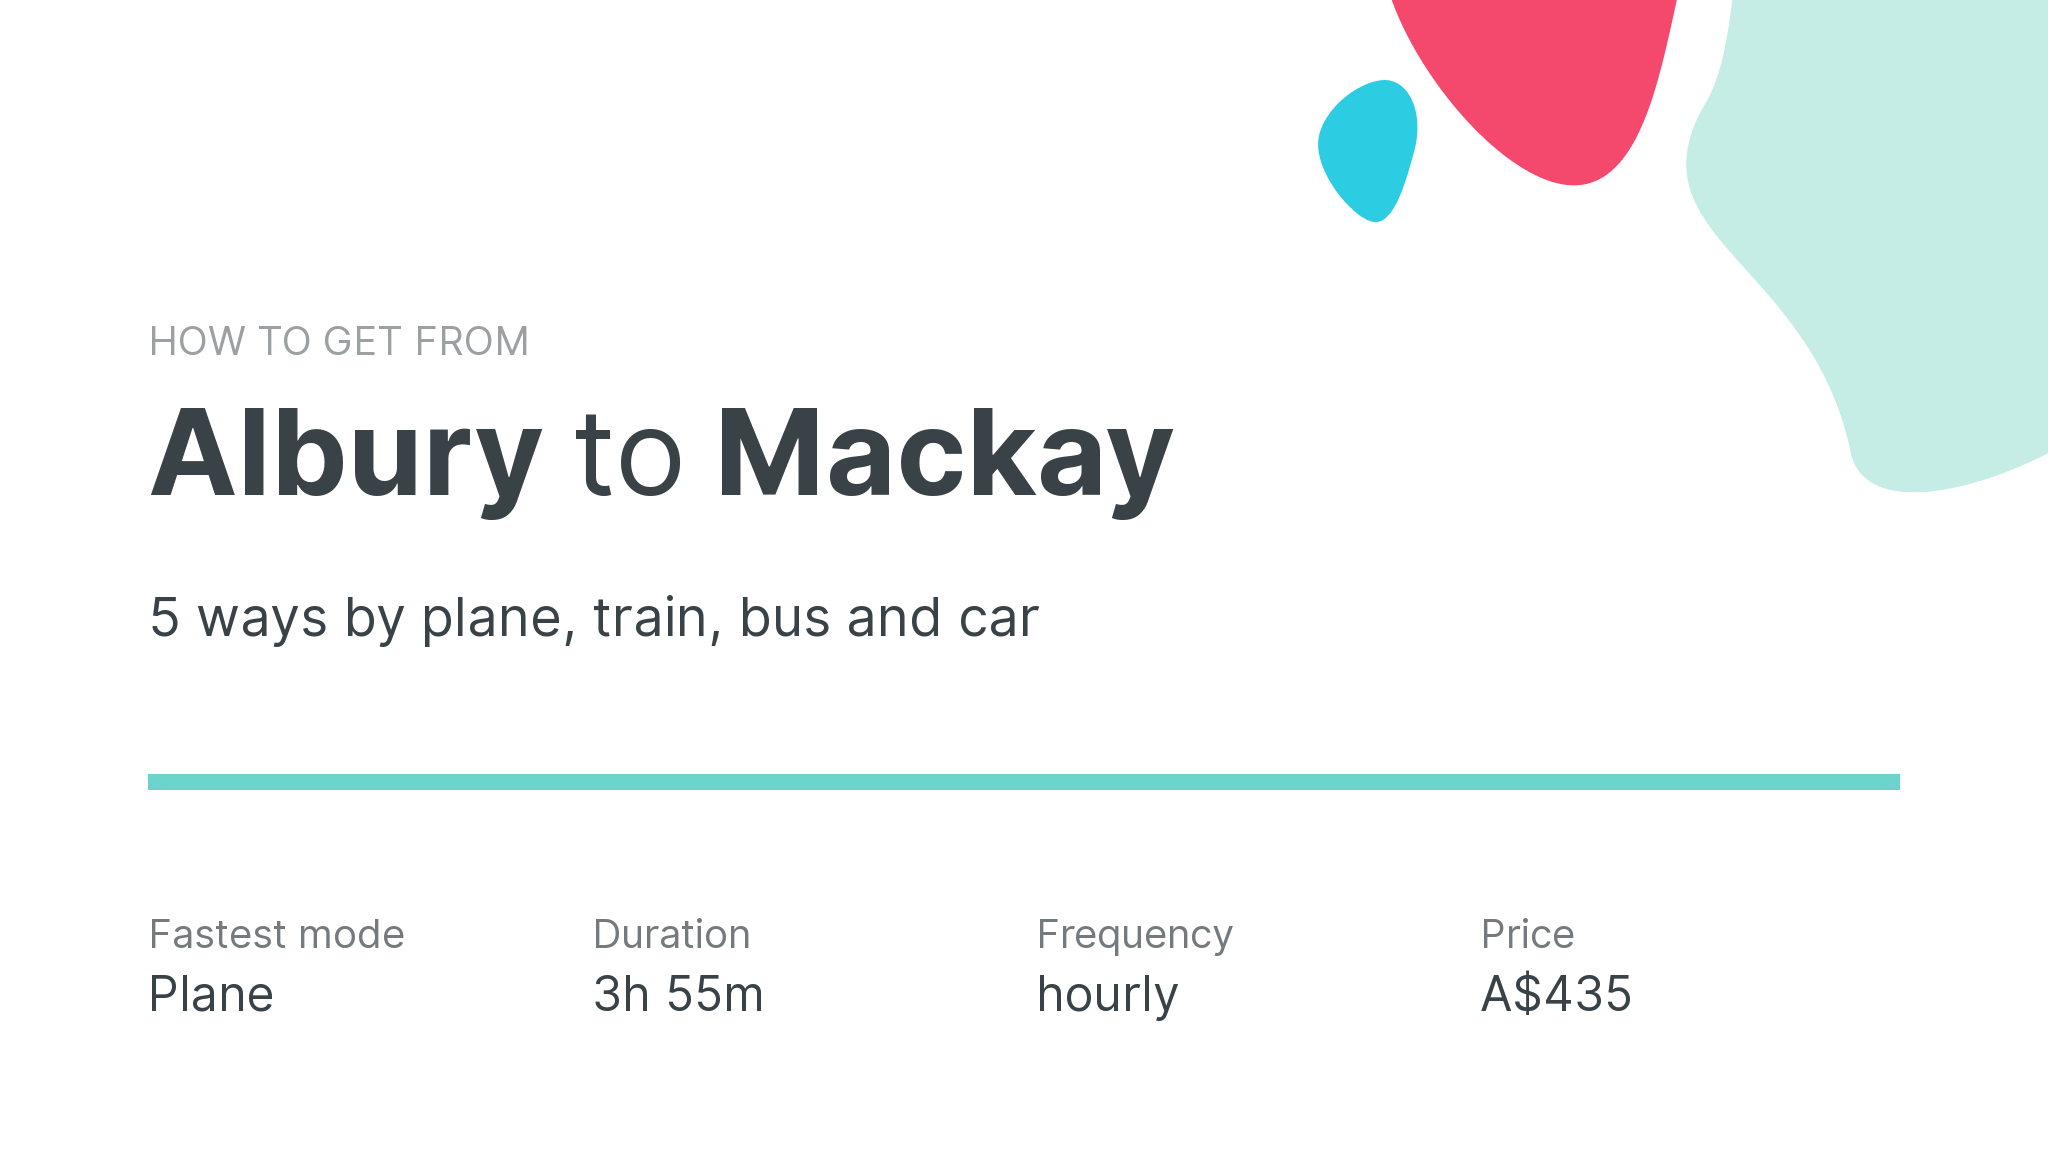 How do I get from Albury to Mackay